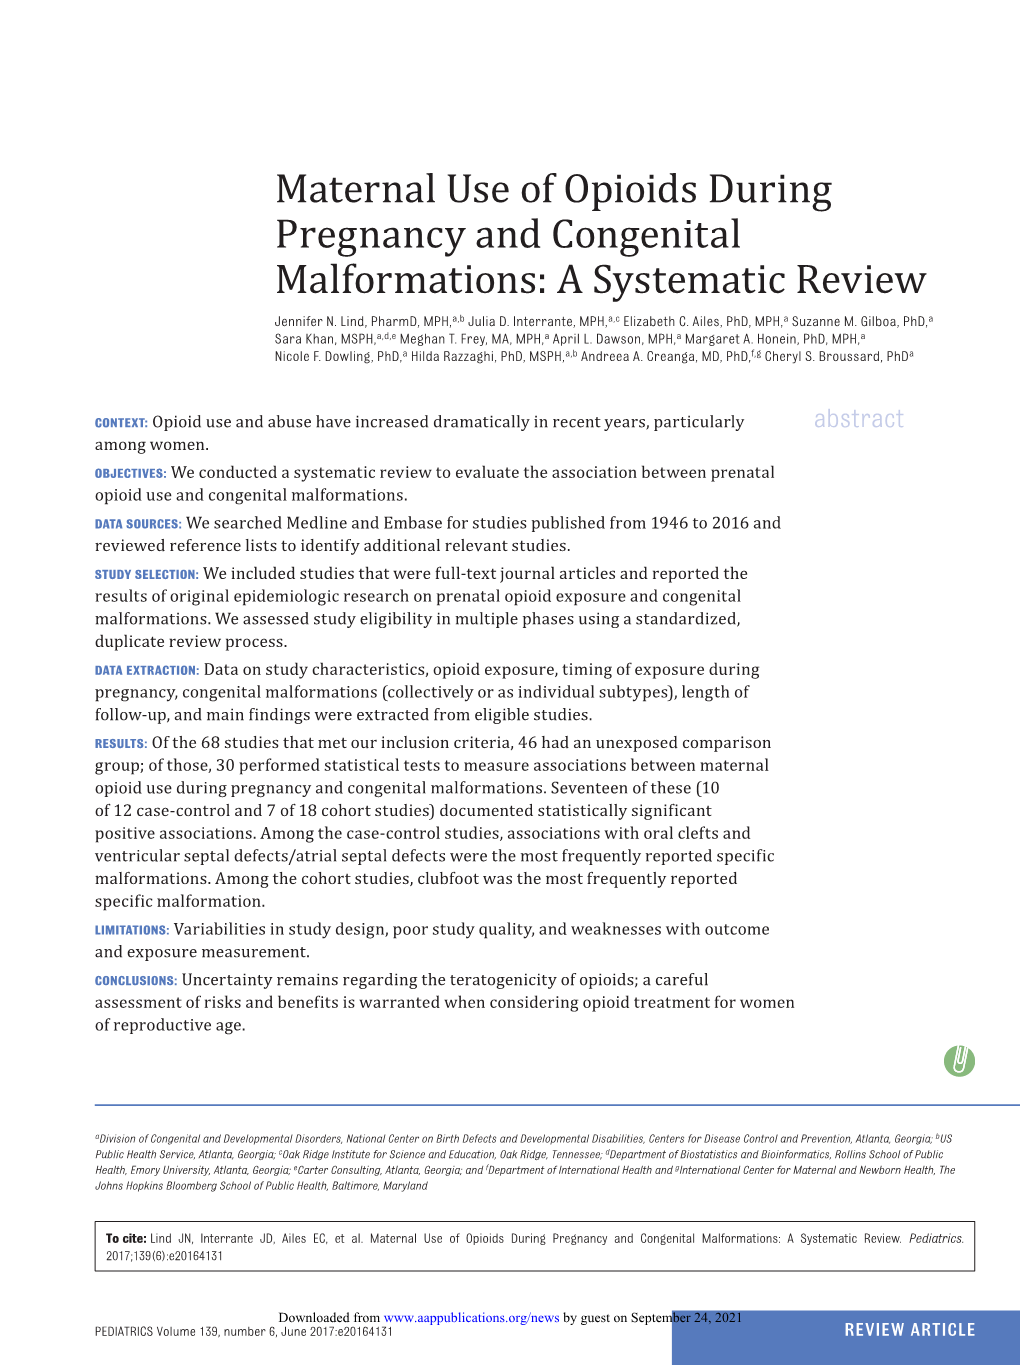 Maternal Use of Opioids During Pregnancy and Congenital Malformations: a Systematic Review